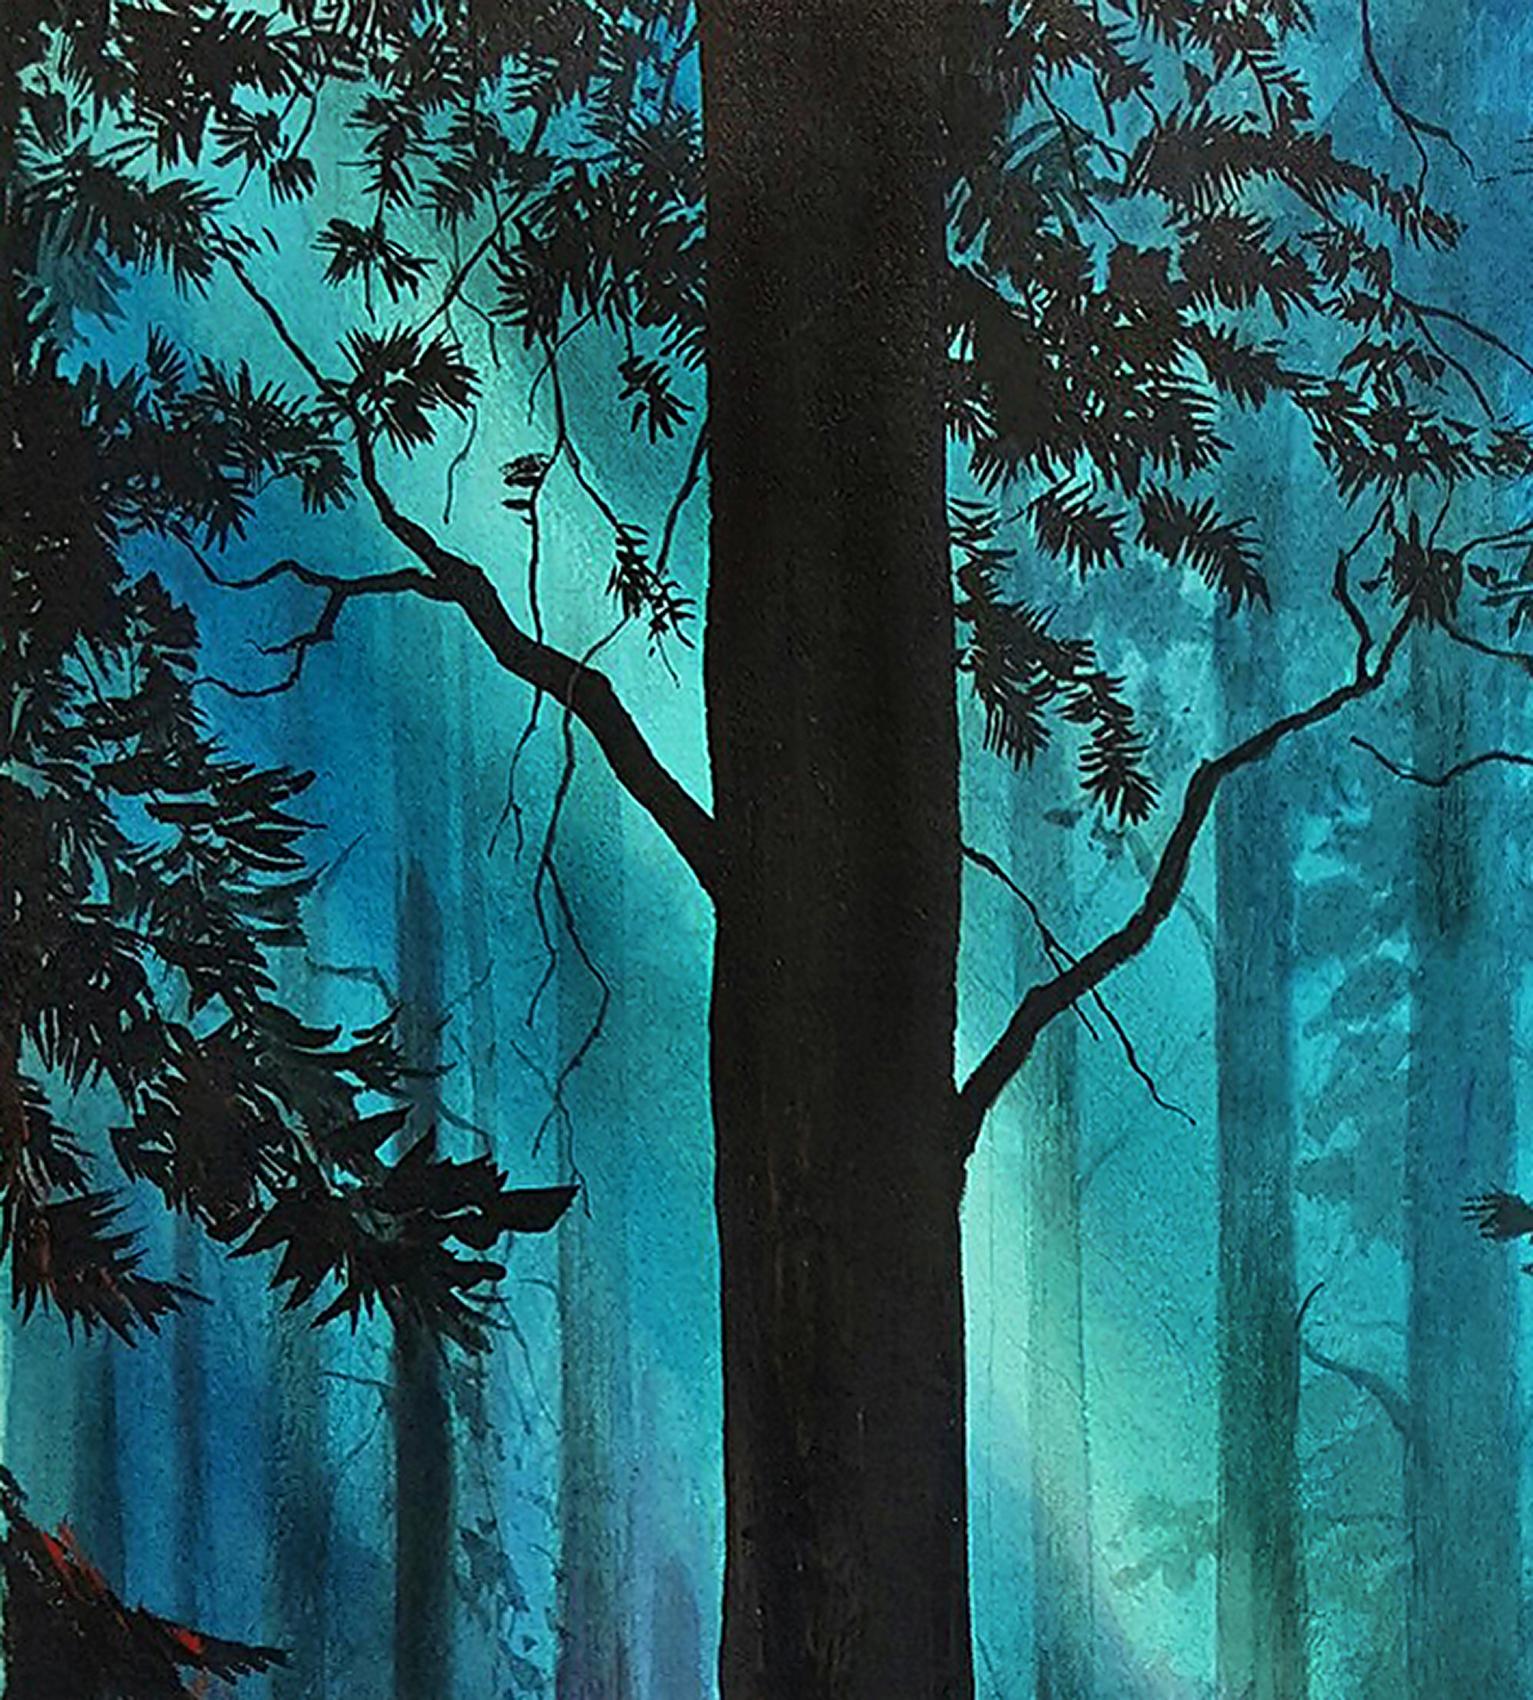 A ray of light in the forest - Solitary Man Surreal Landscape  - American Realist Painting by Hector Garrido